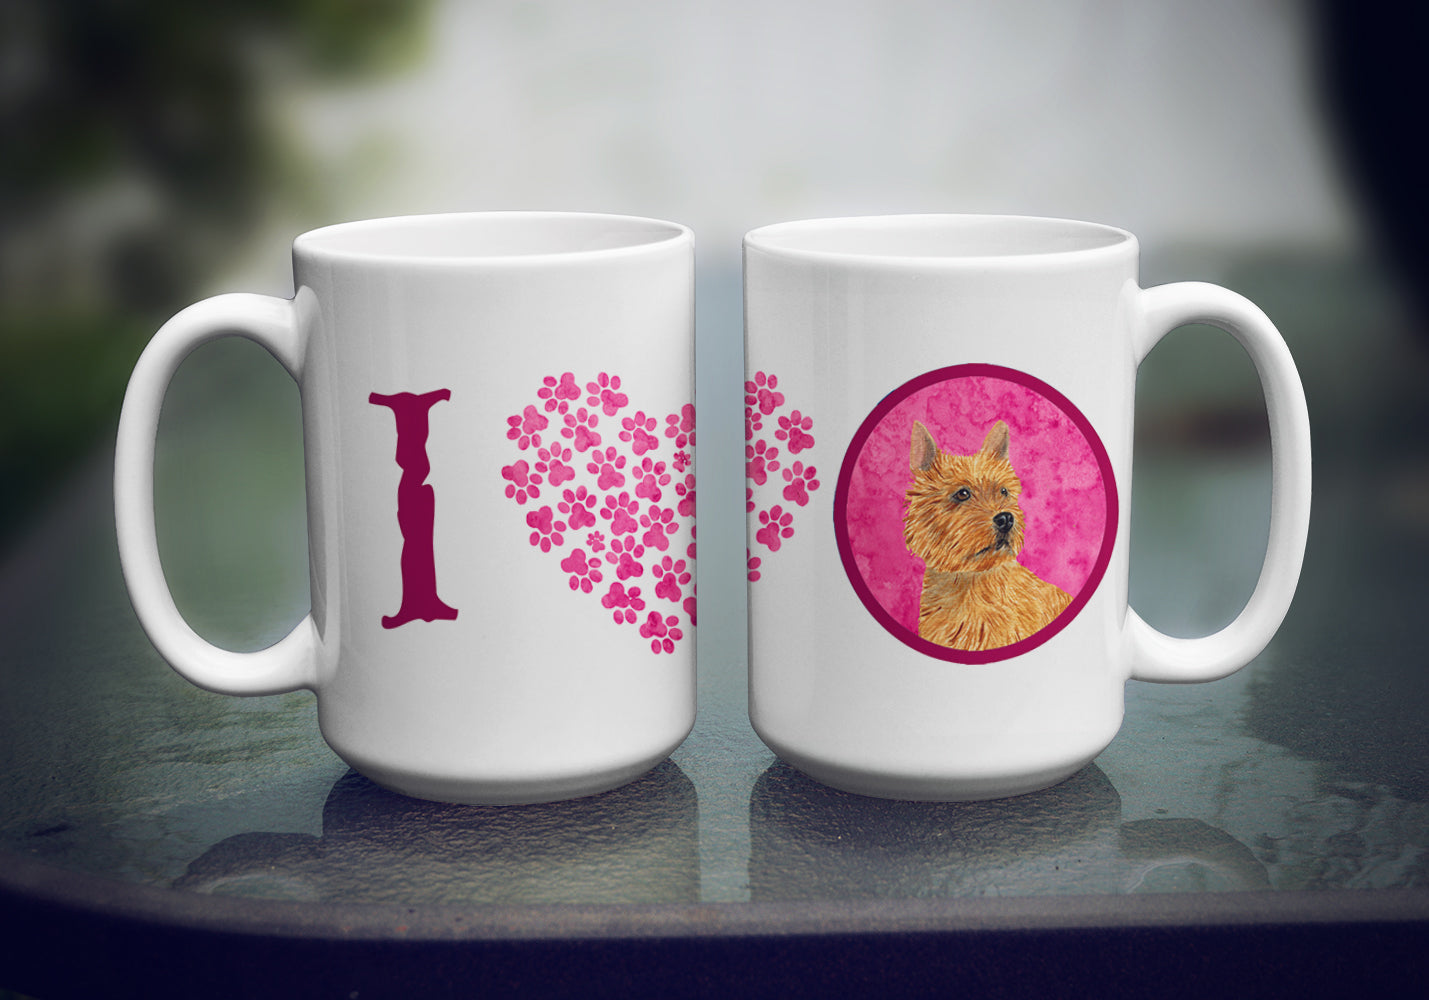 Norwich Terrier  Dishwasher Safe Microwavable Ceramic Coffee Mug 15 ounce SS4775  the-store.com.